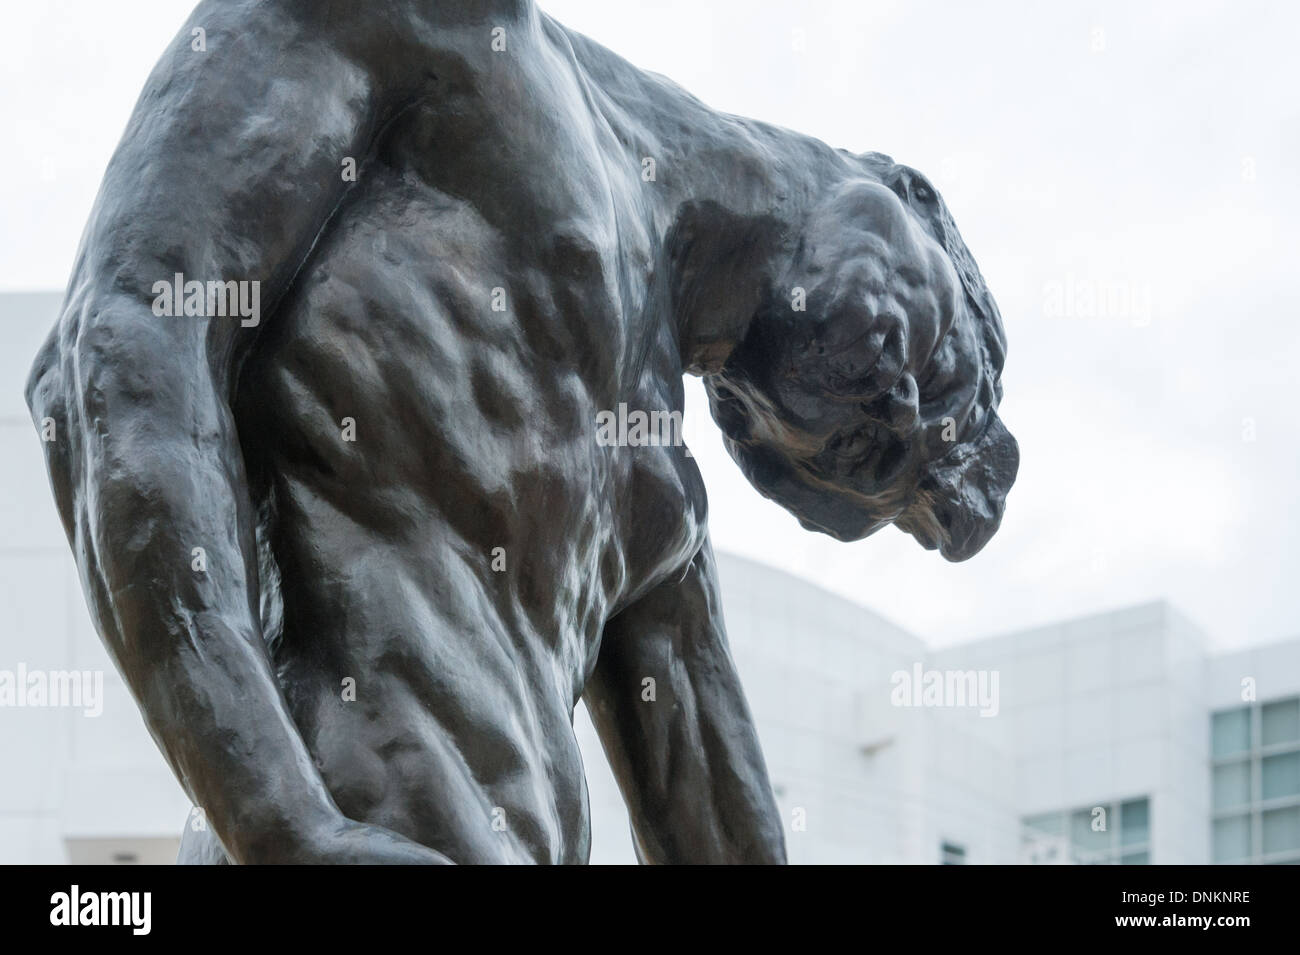 Figurative sculpture entitled 'The Shade' by Auguste Rodin at the High Museum of Art in Atlanta, Georgia. USA. Stock Photo